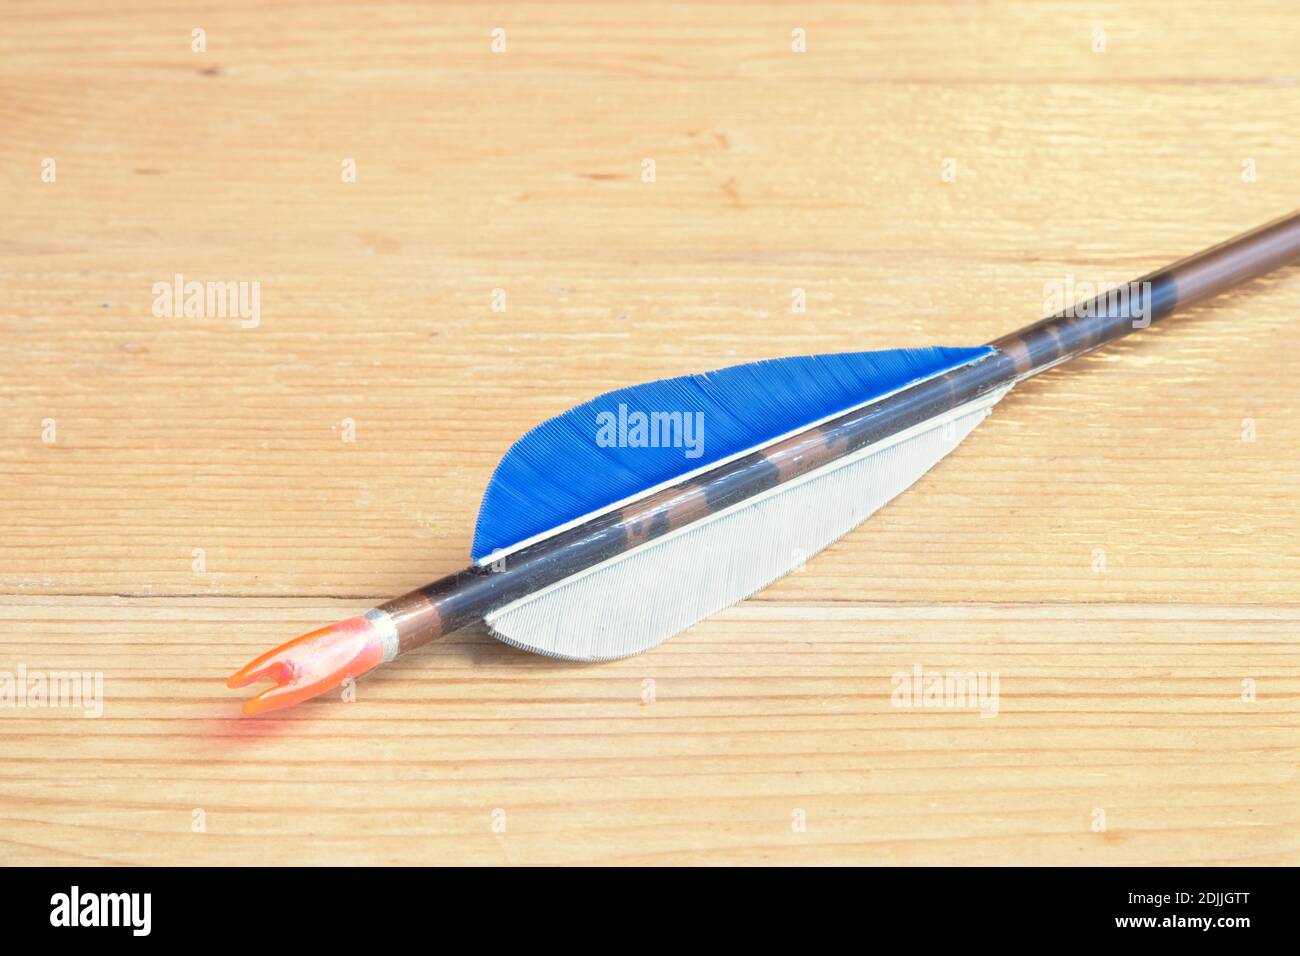 The nock and fletching side of an aluminium hunting arrow Stock Photo